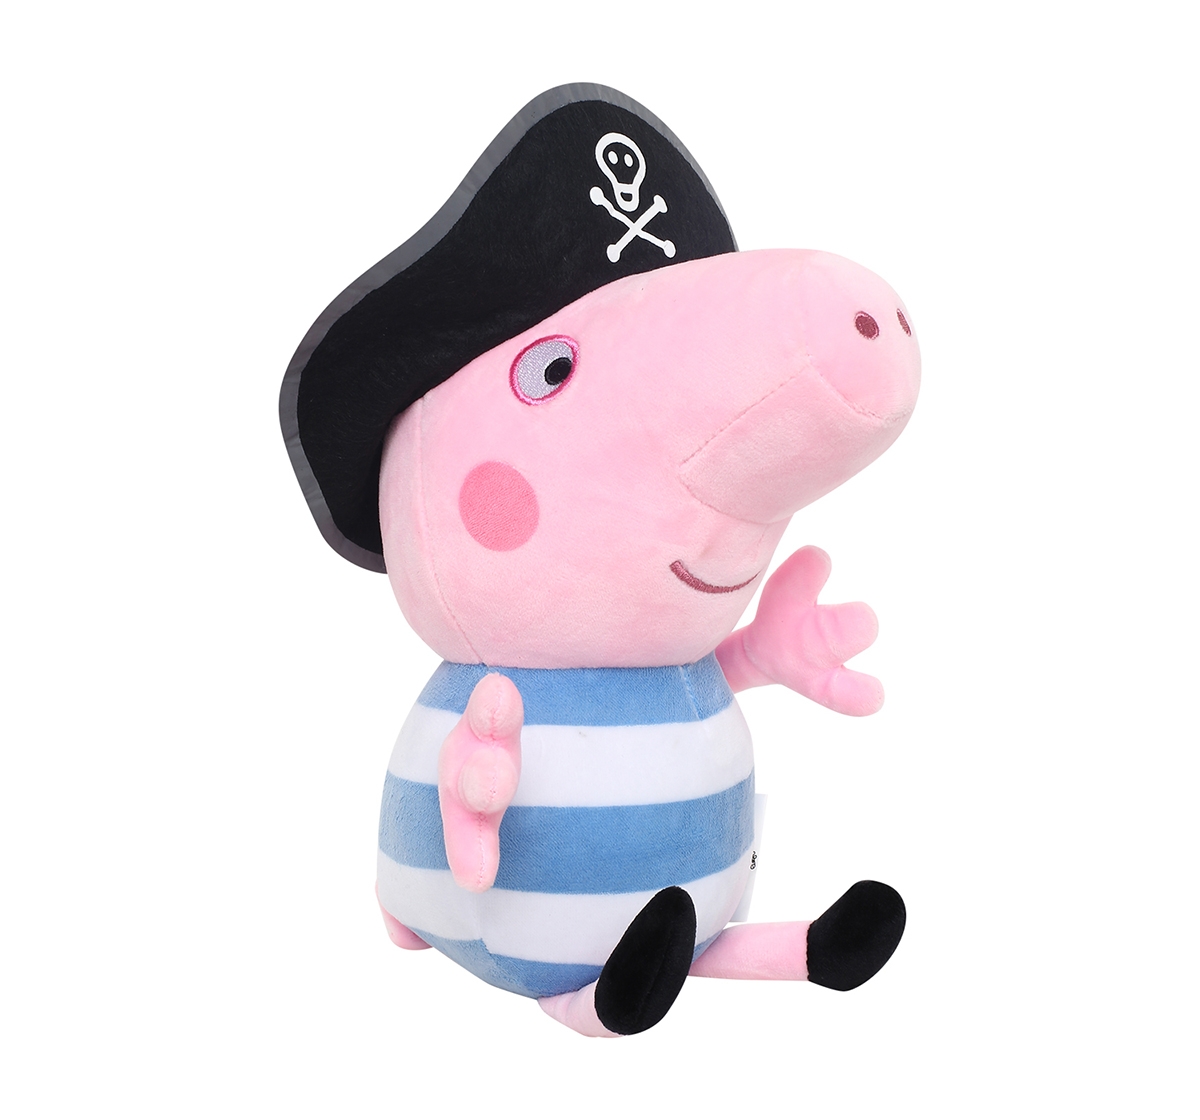 Peppa Pig | Peppa Pig In Pirate Costume Multi Color 30 Cm Soft Toy for Kids age 3Y+ - 30 Cm 1